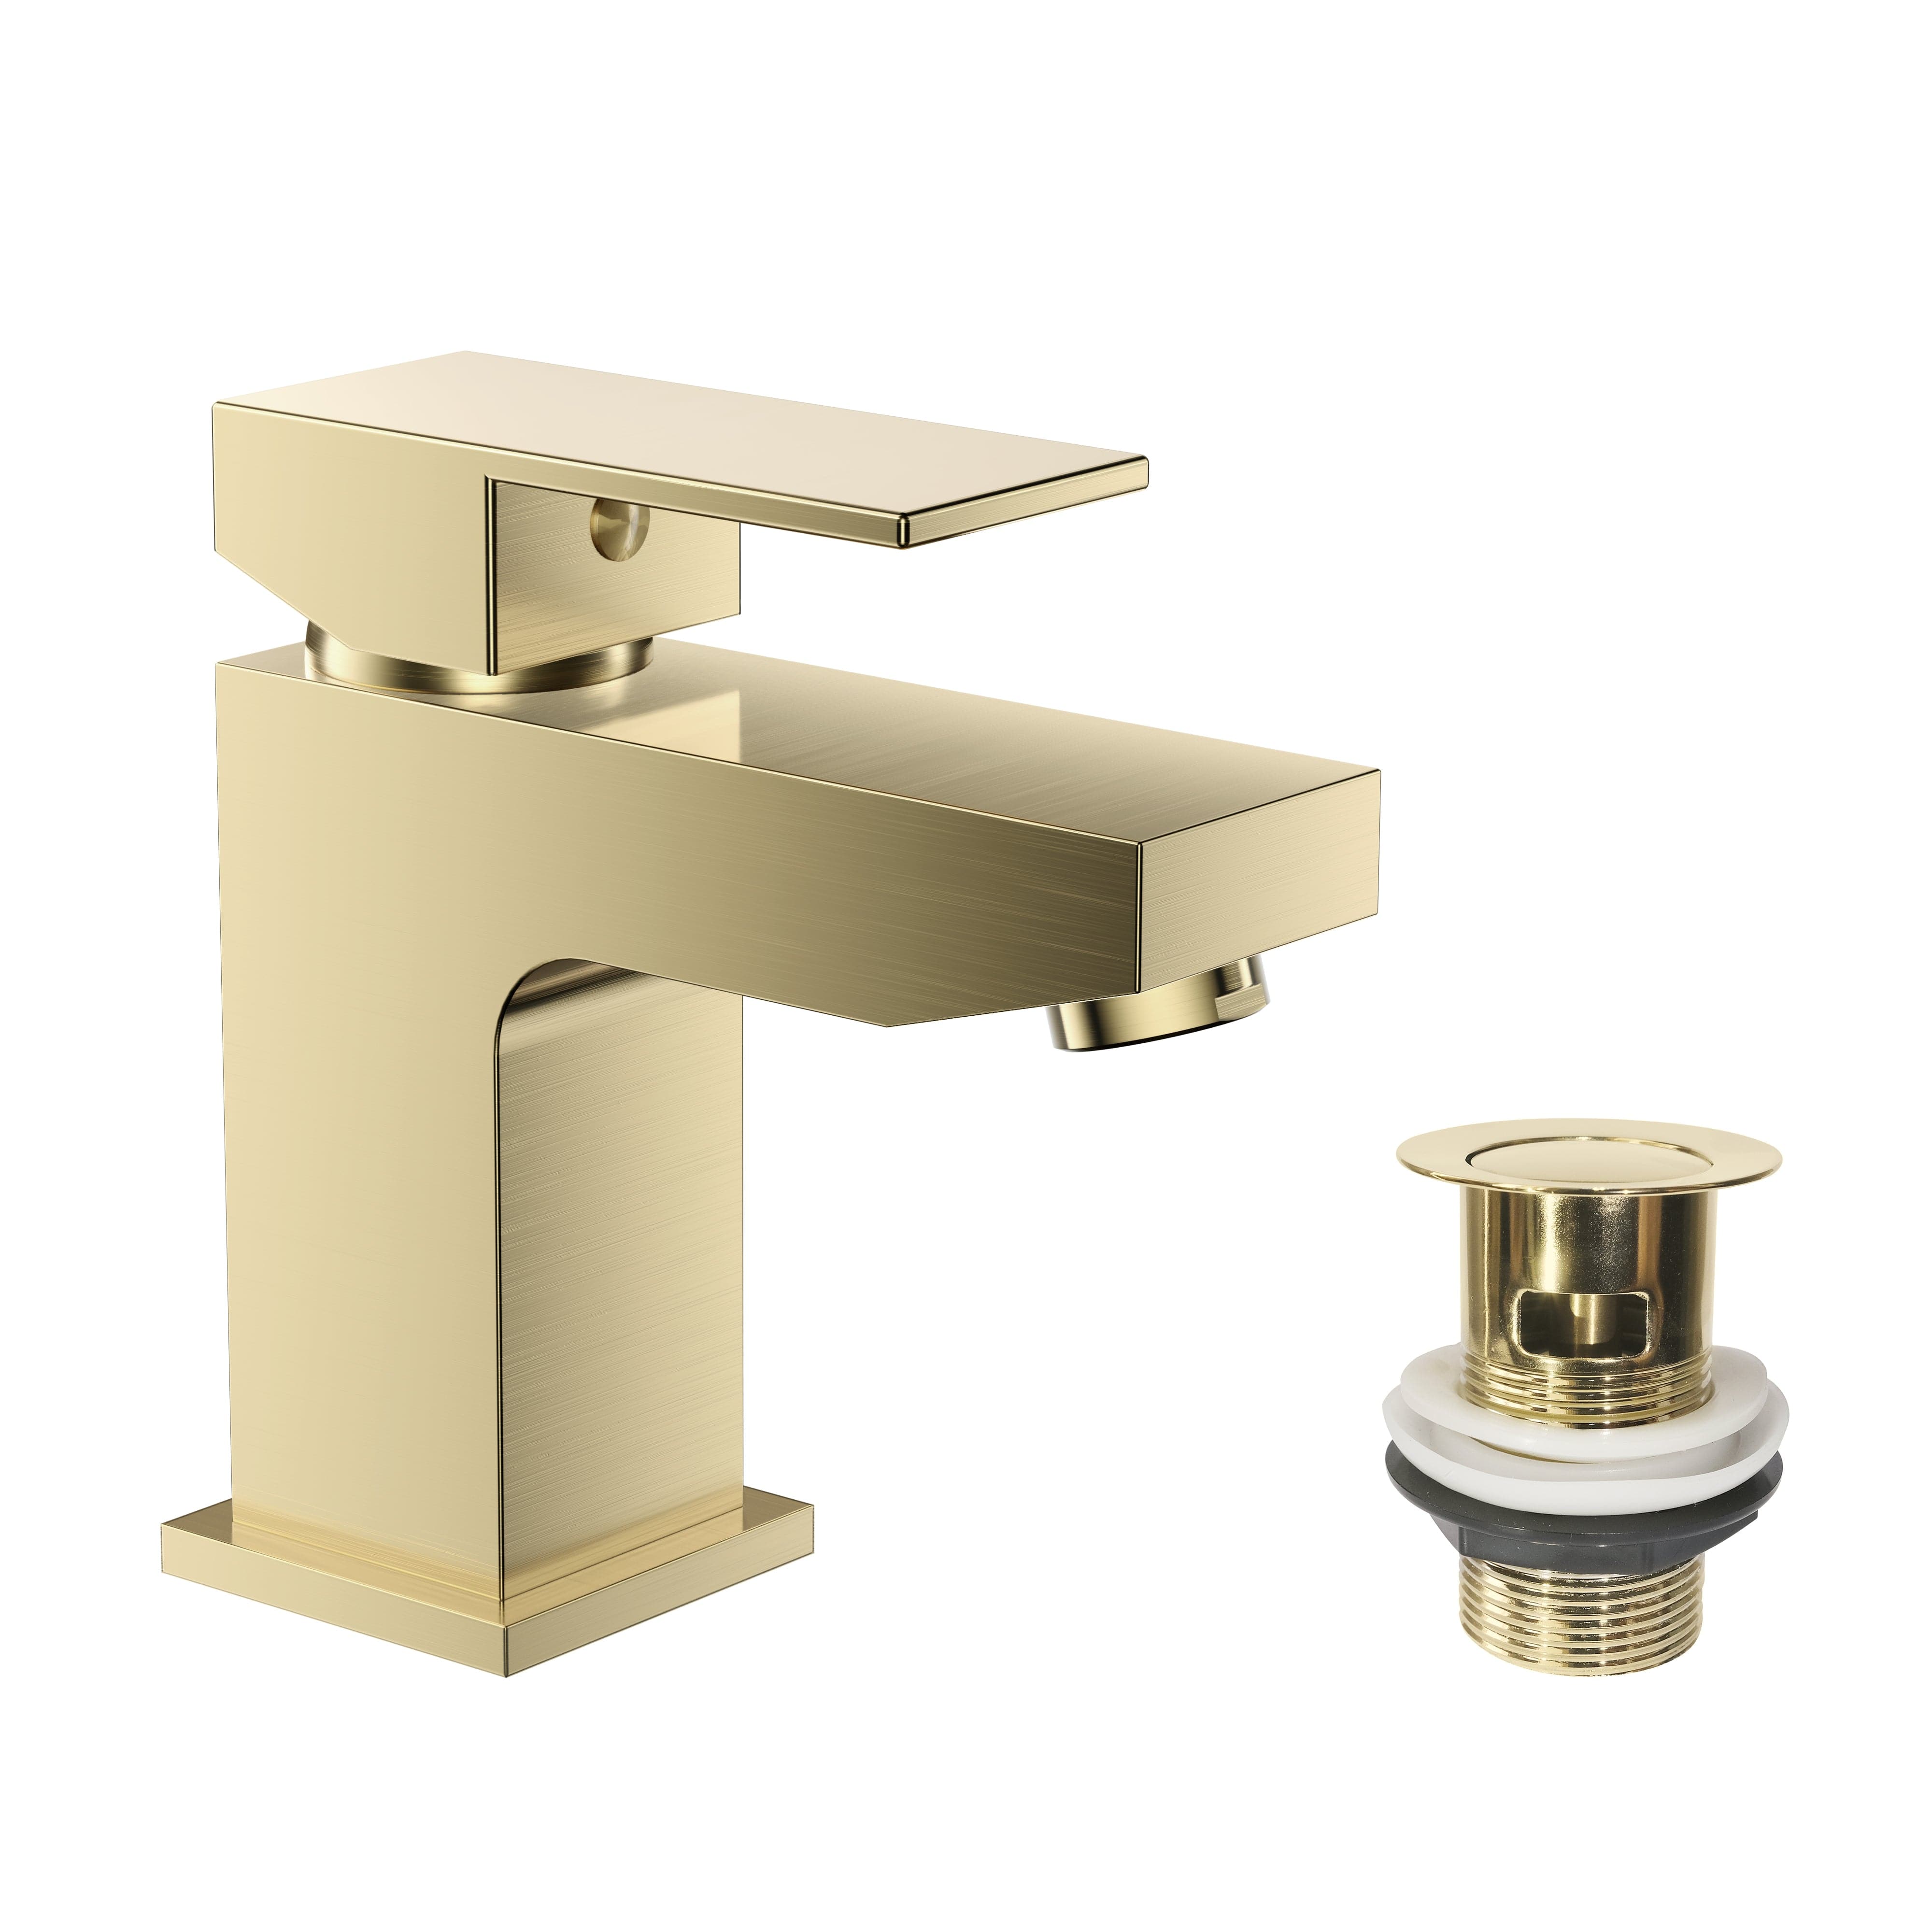 Modern Munro Mono Basin Mixer Tap in Brushed Brass finish for contemporary bathrooms. Buy online for stylish upgrades.